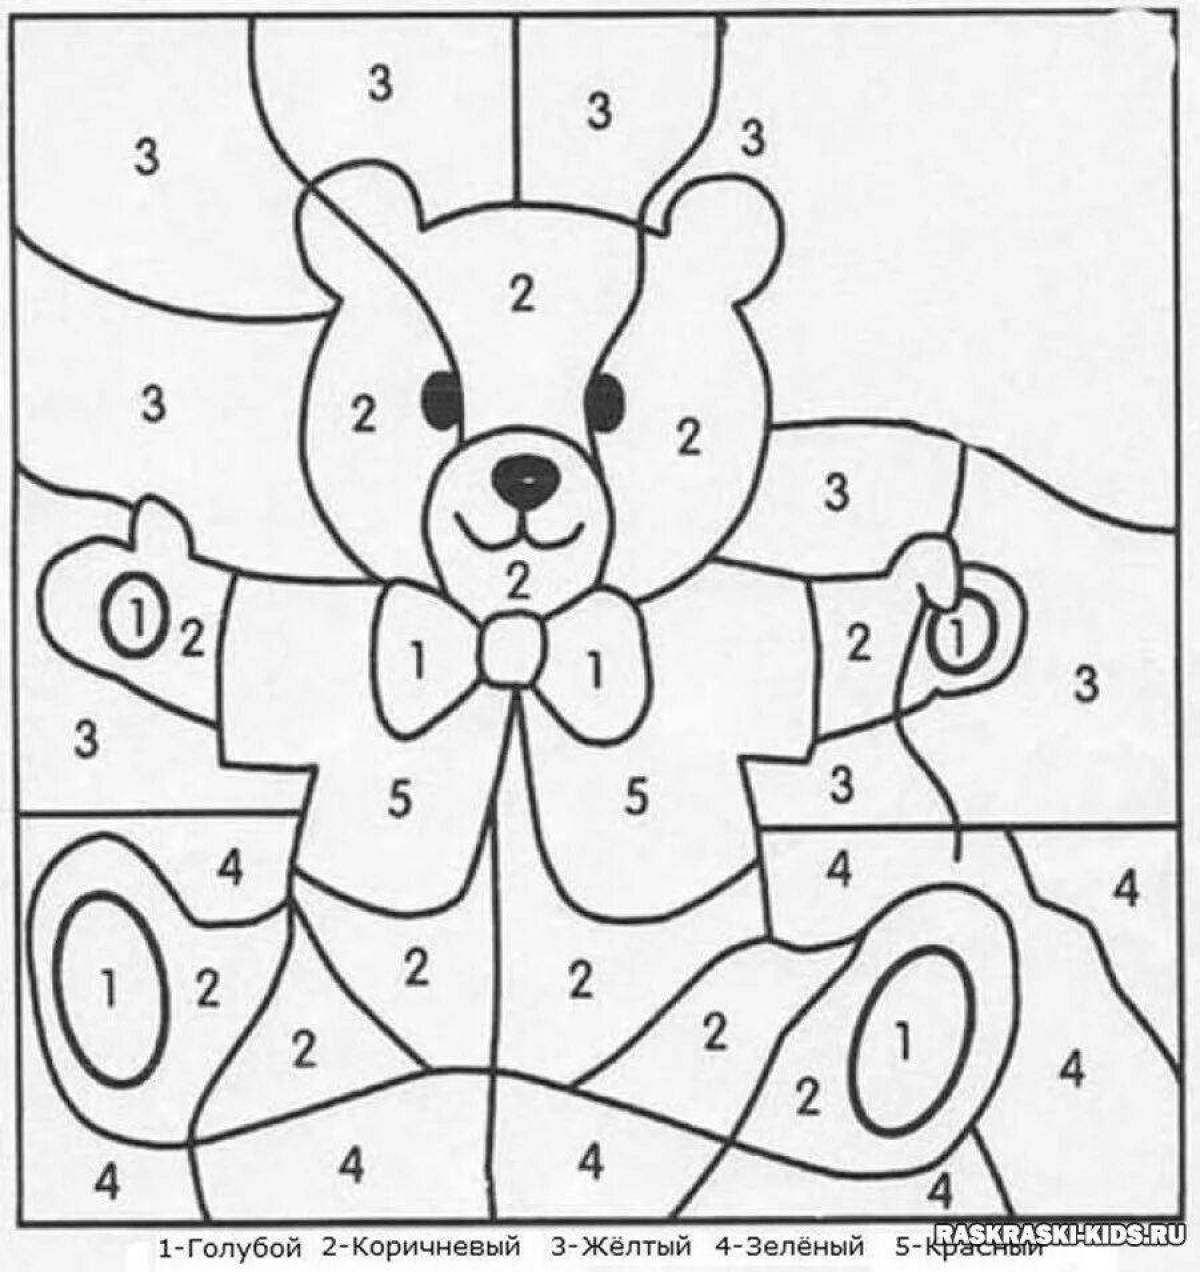 A fun coloring book for kids with colored numbers